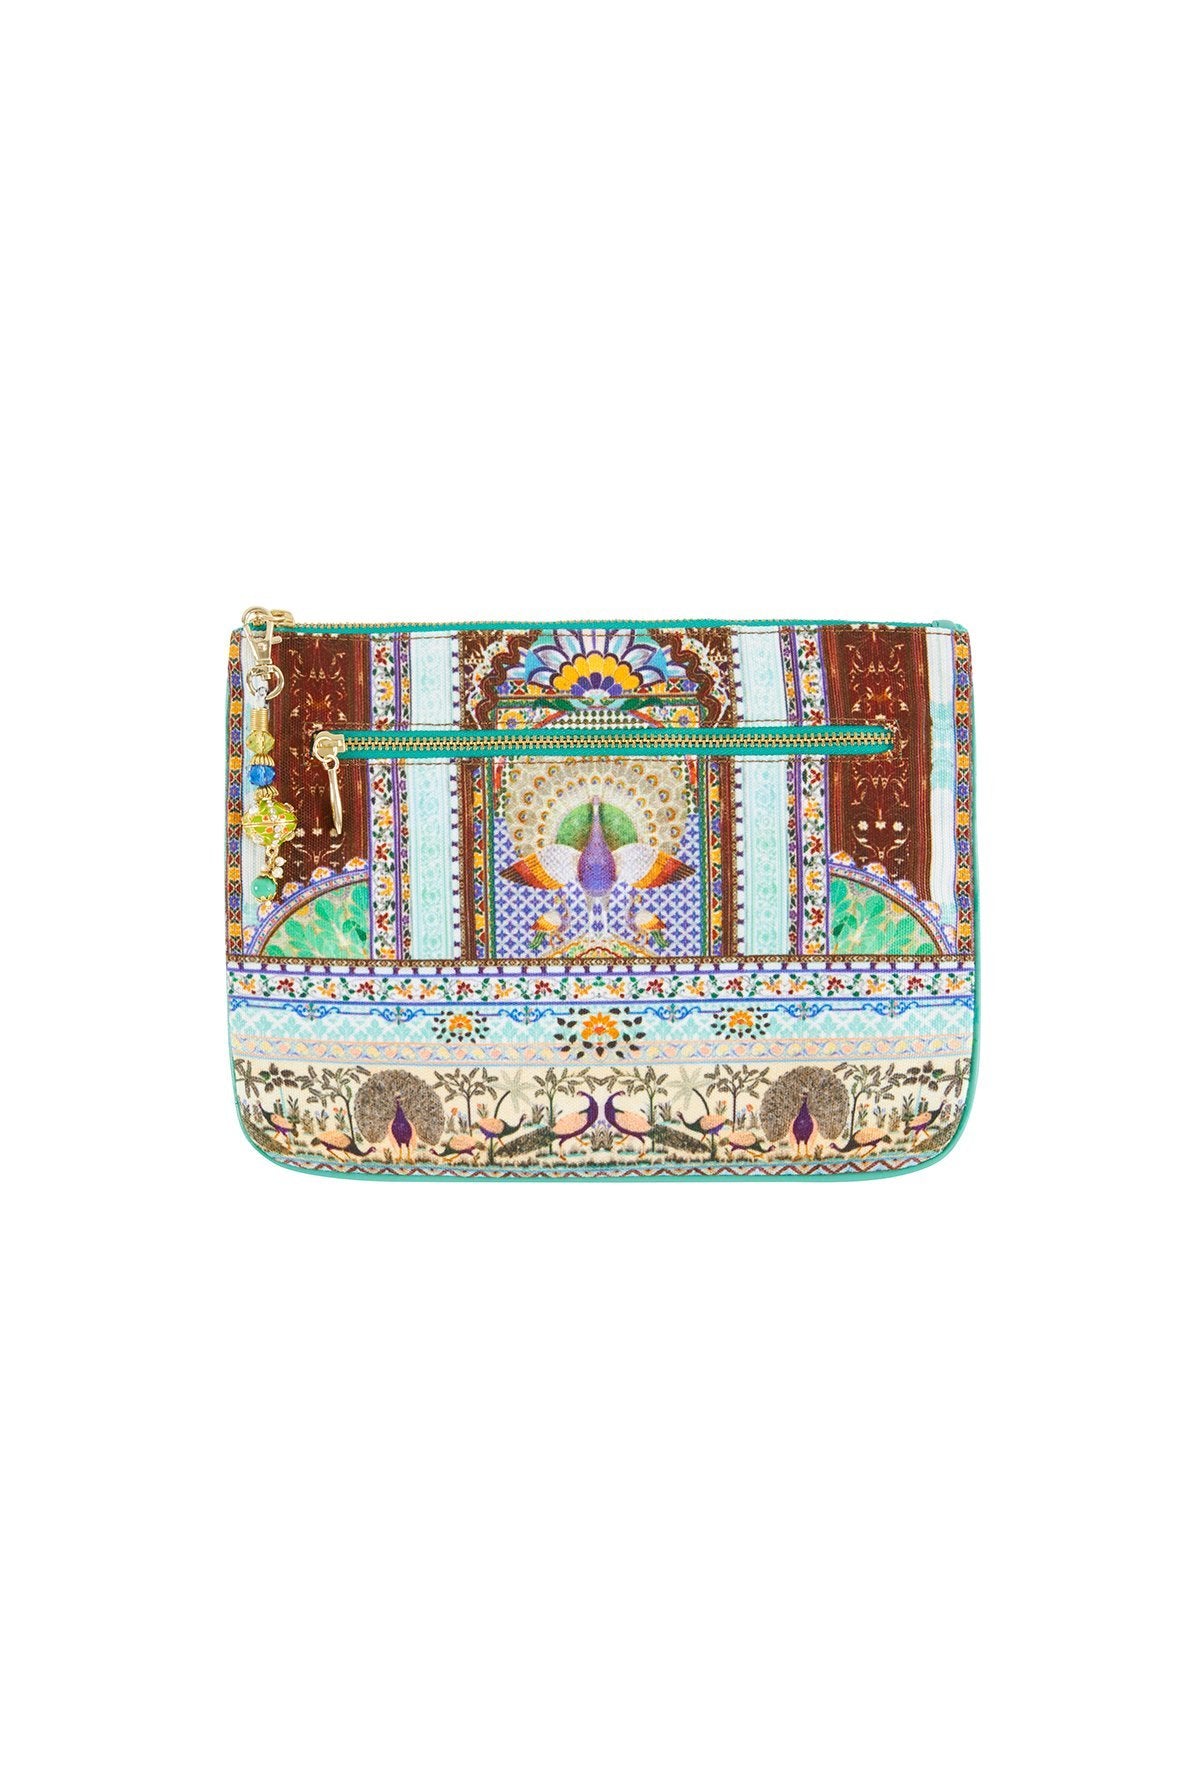 THE KING AND I SMALL CANVAS CLUTCH